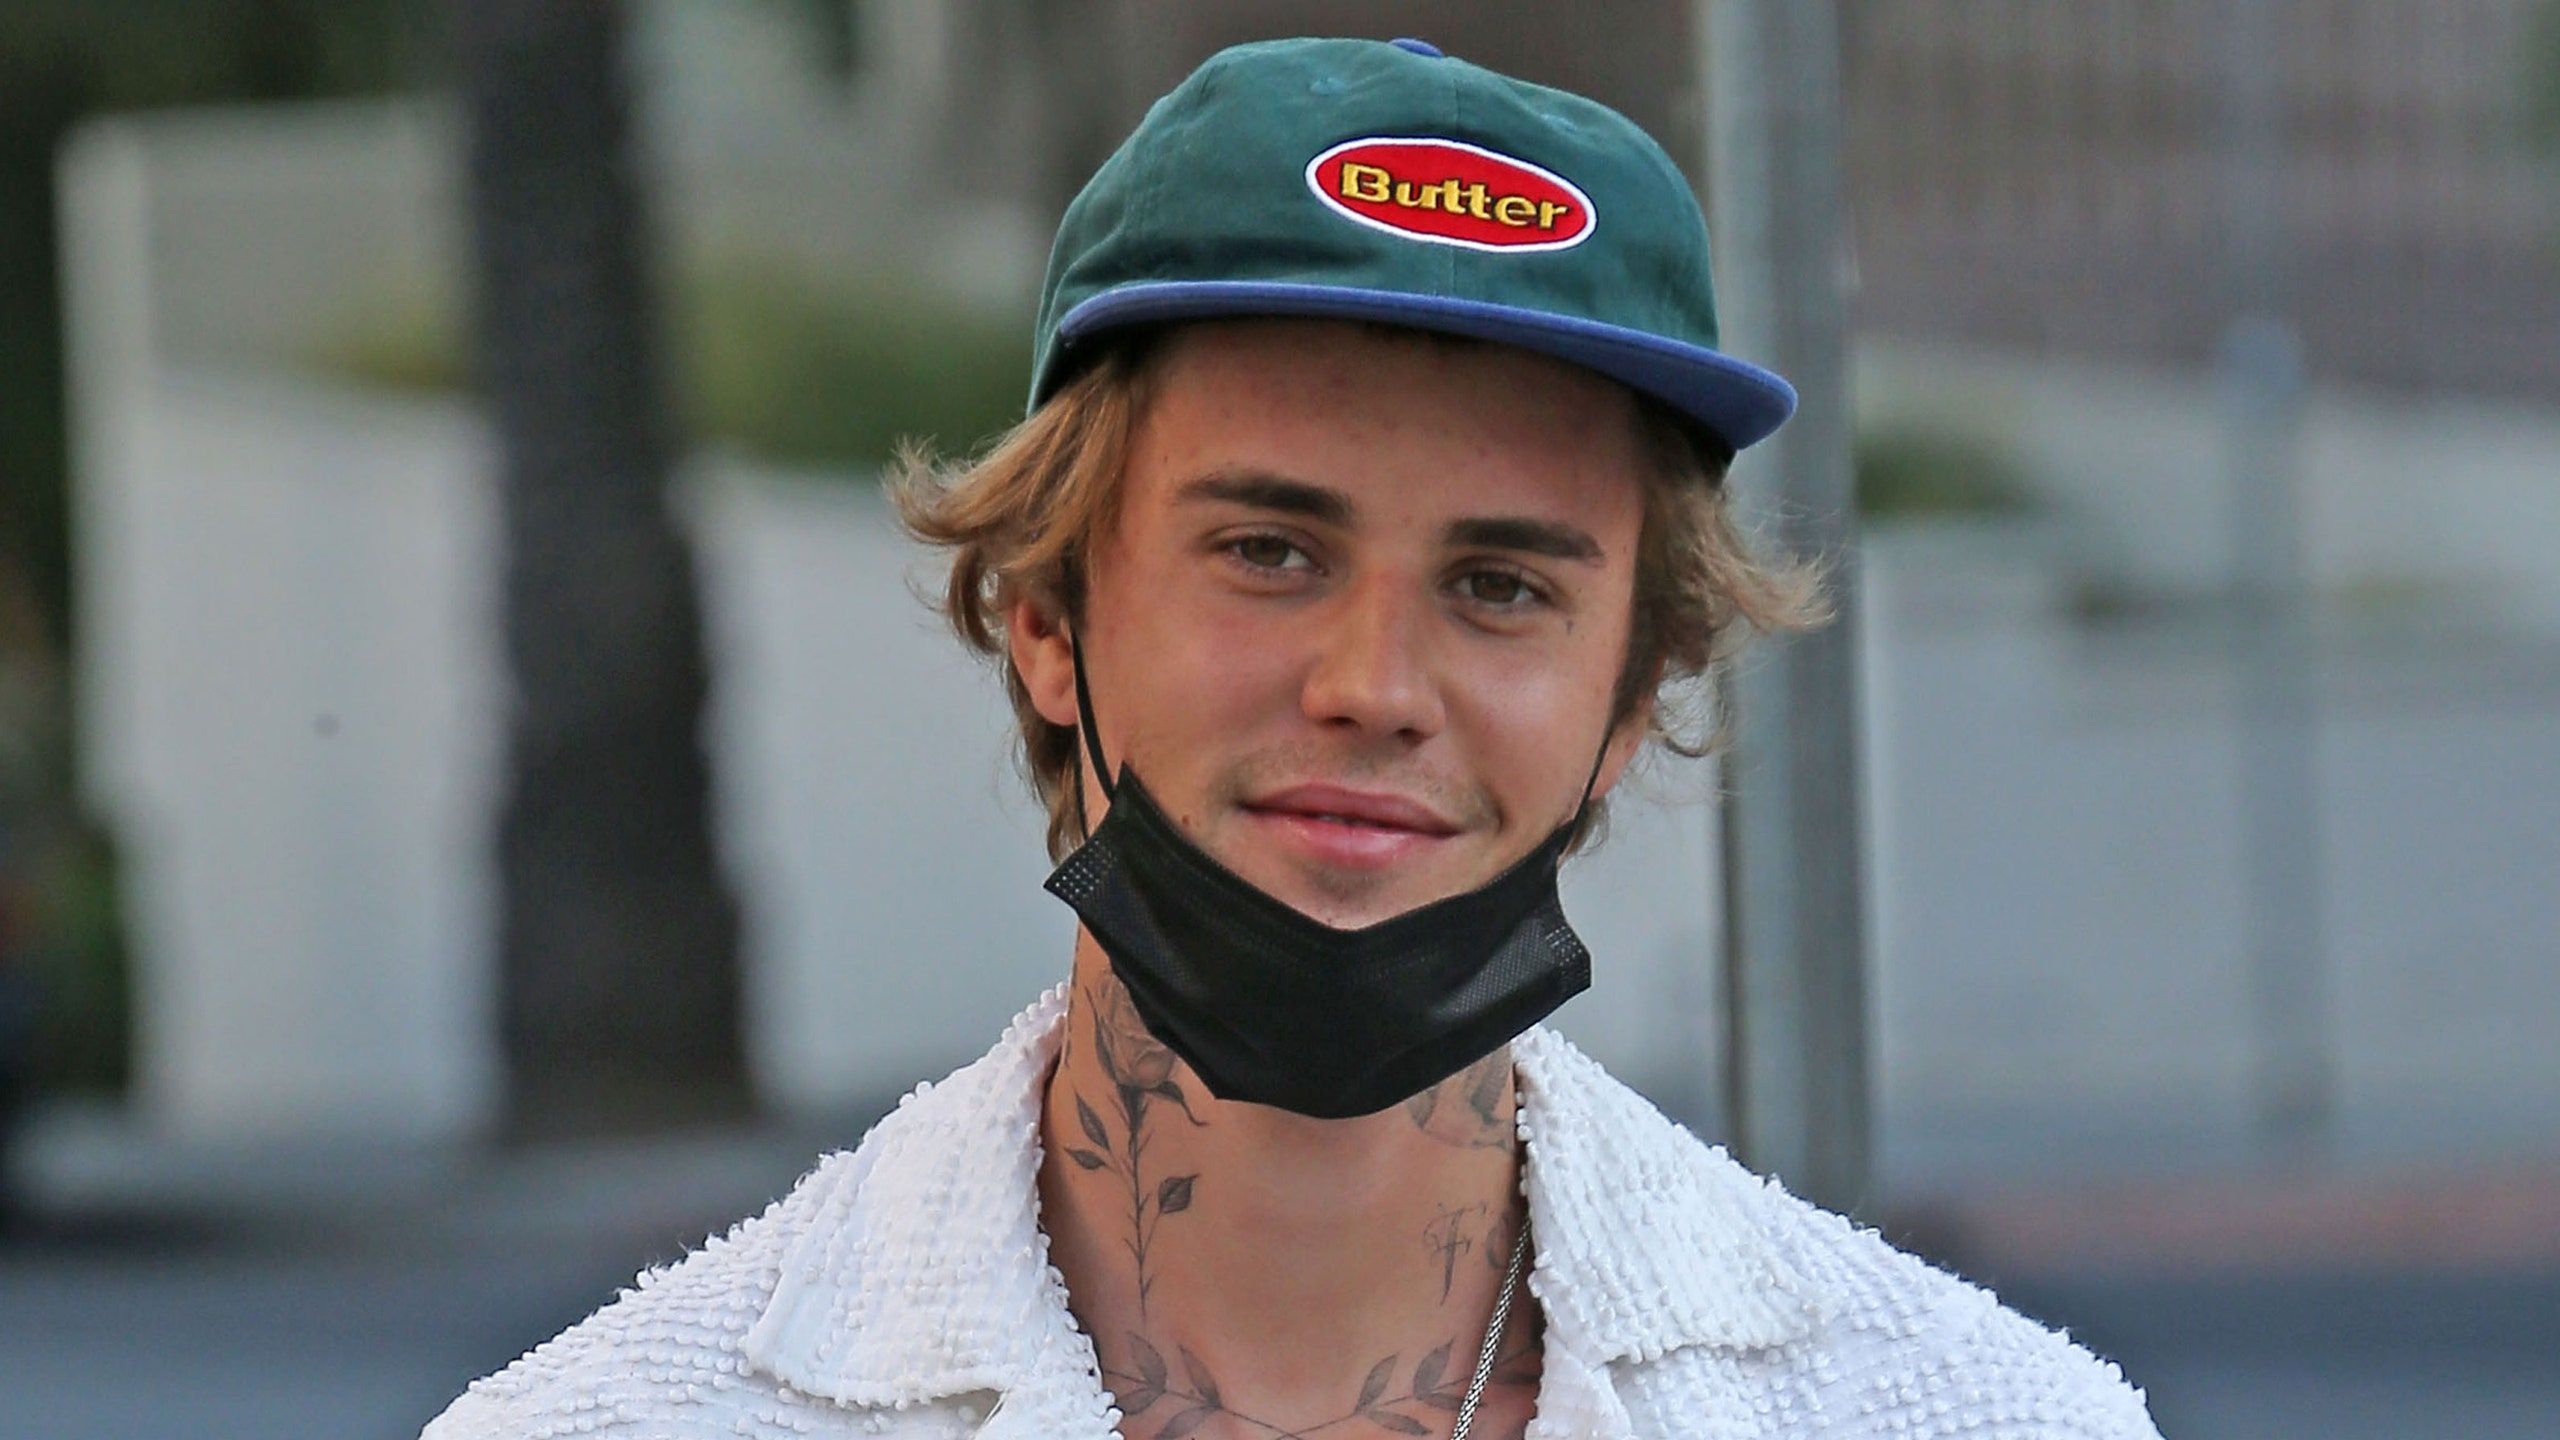 Justin Bieber Shared a Video of Himself Getting His Tattoos Covered Up for His New Anyone Music Video